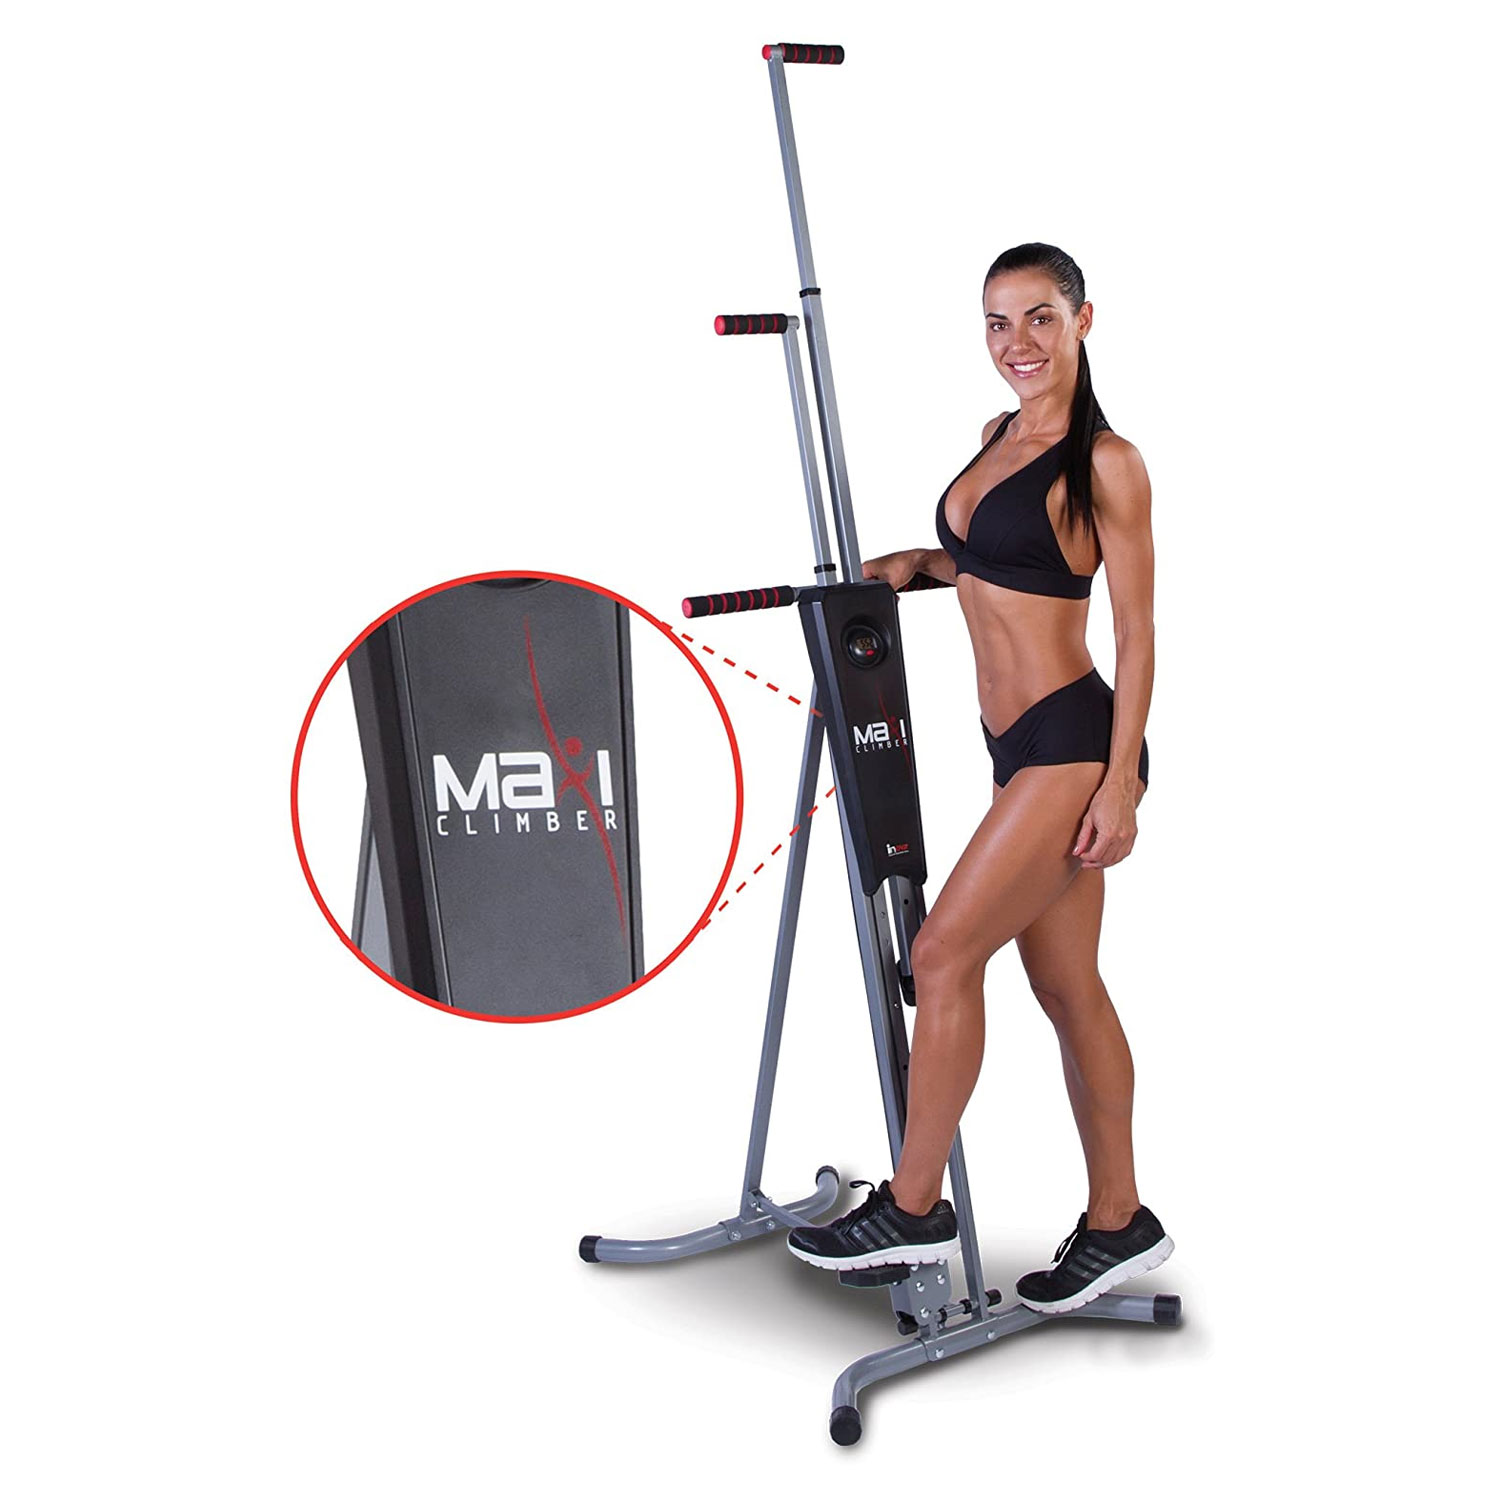 MaxiClimber Classic Vertical Resistance Climber and Cardio Exercise System - image 2 of 8